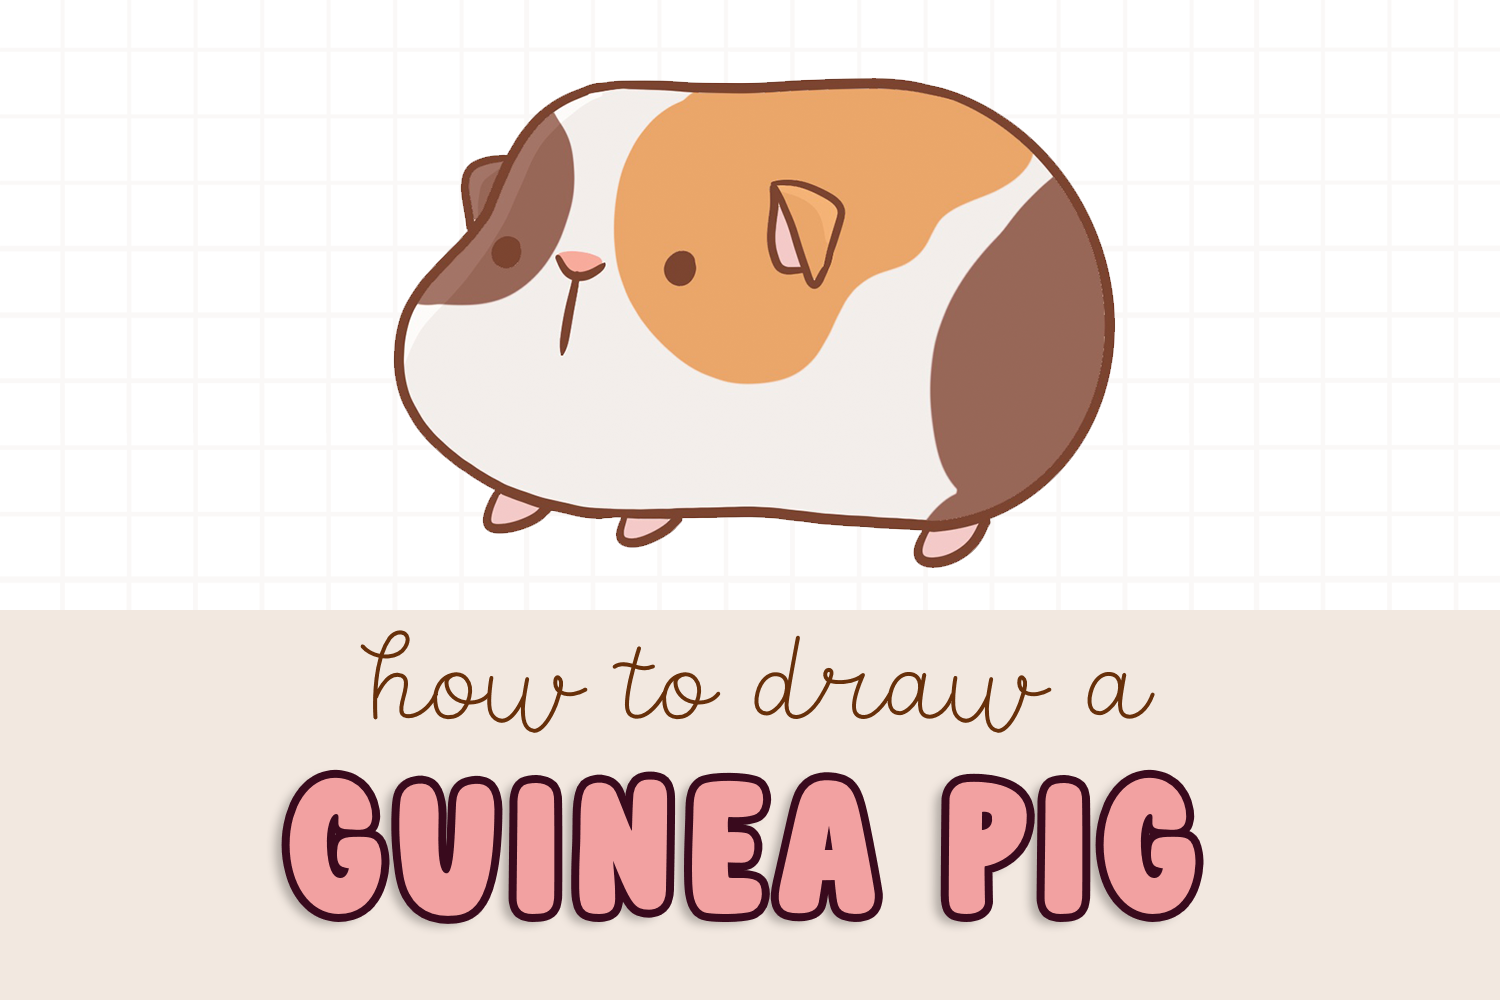 How to Draw a Cute Guinea Pig (Easy Step-by-Step for Kids)